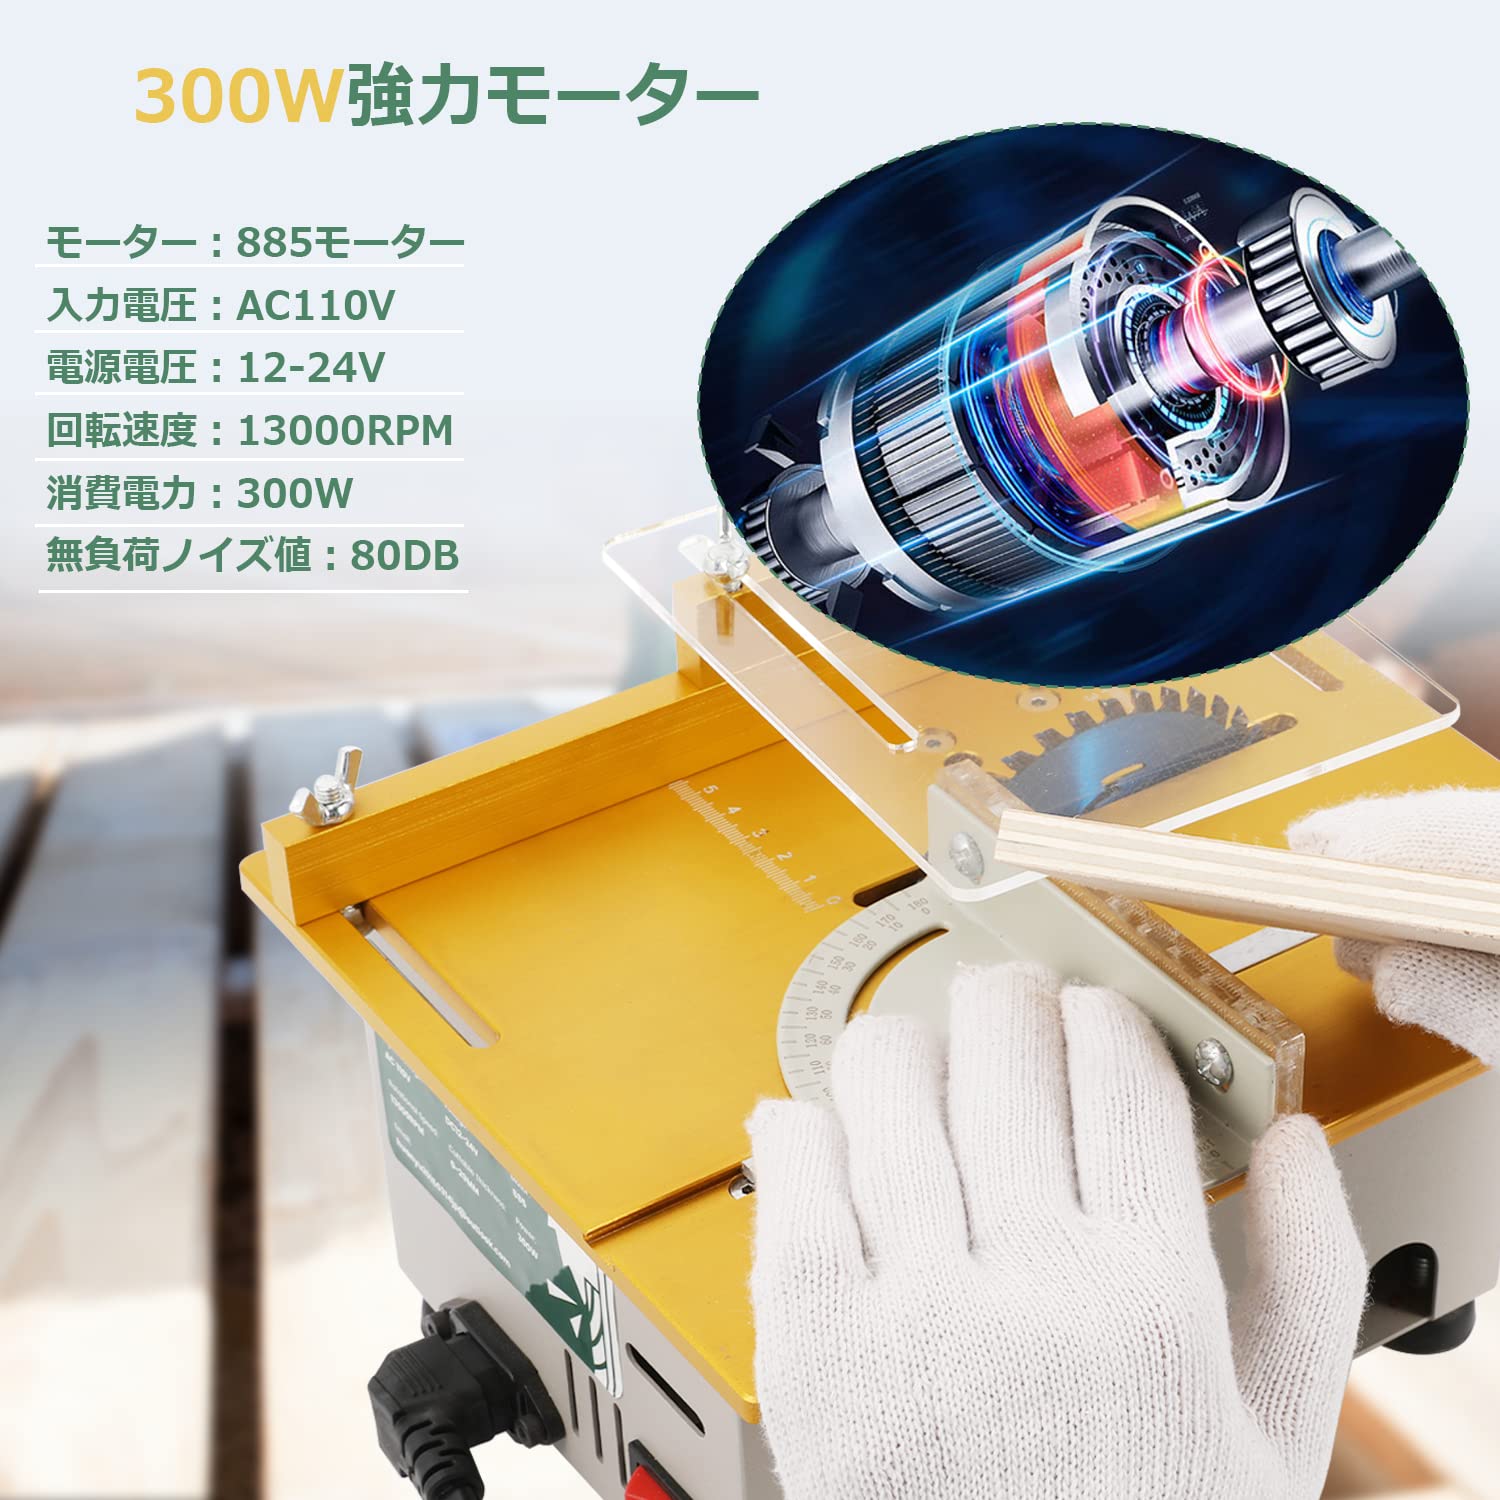 Huanyu Mini Table Saw 300W Powerful Cutting Tabletop Circular Saw 26-29mm For Hard Materials Wood/Substrate/Acrylic Saw Blade/With Drill Chuck Household DIY (Gold / 300W)